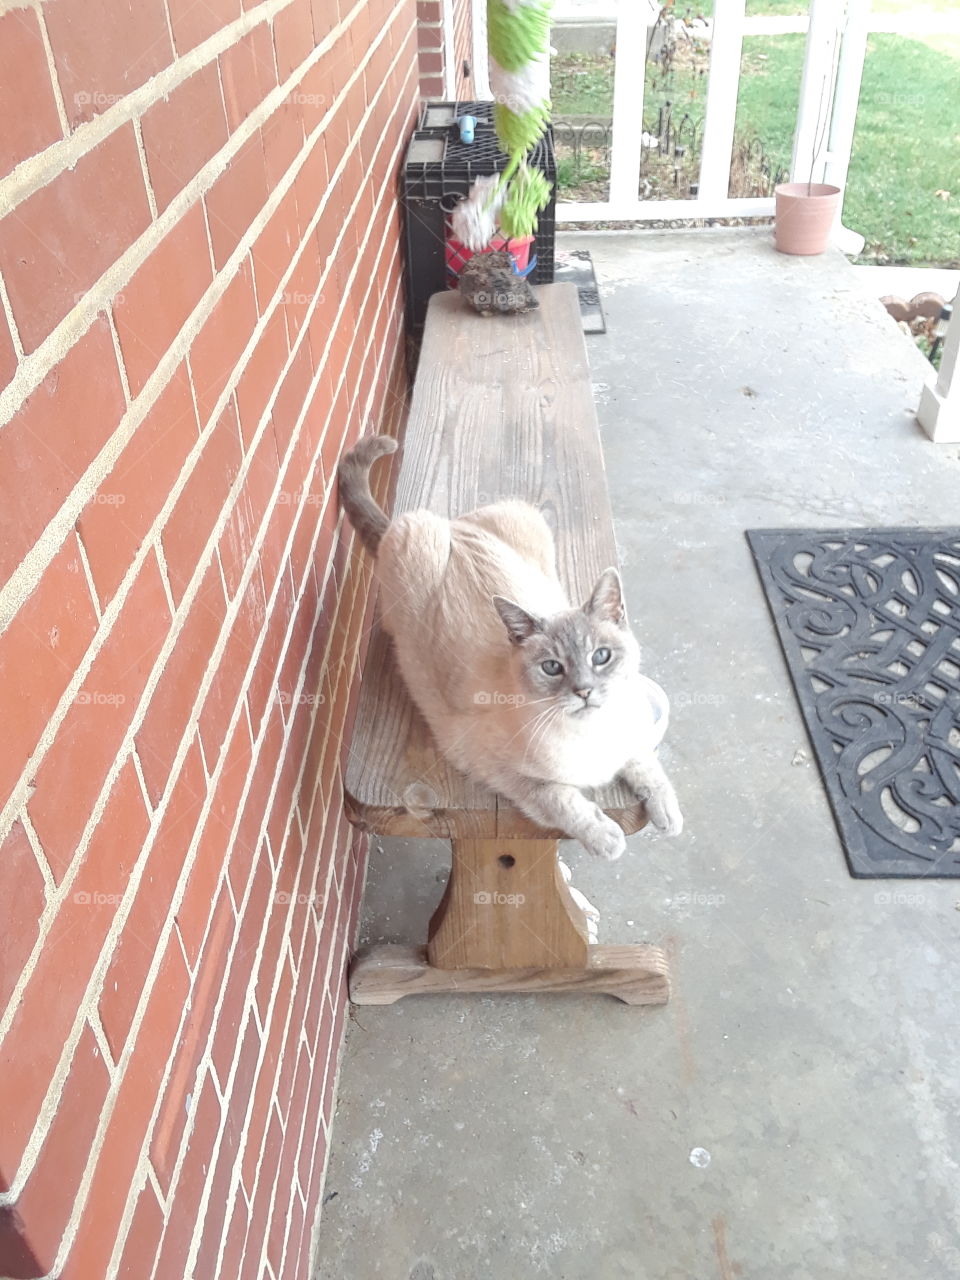 Siamese Tabby cat on the porch brick background on the bench